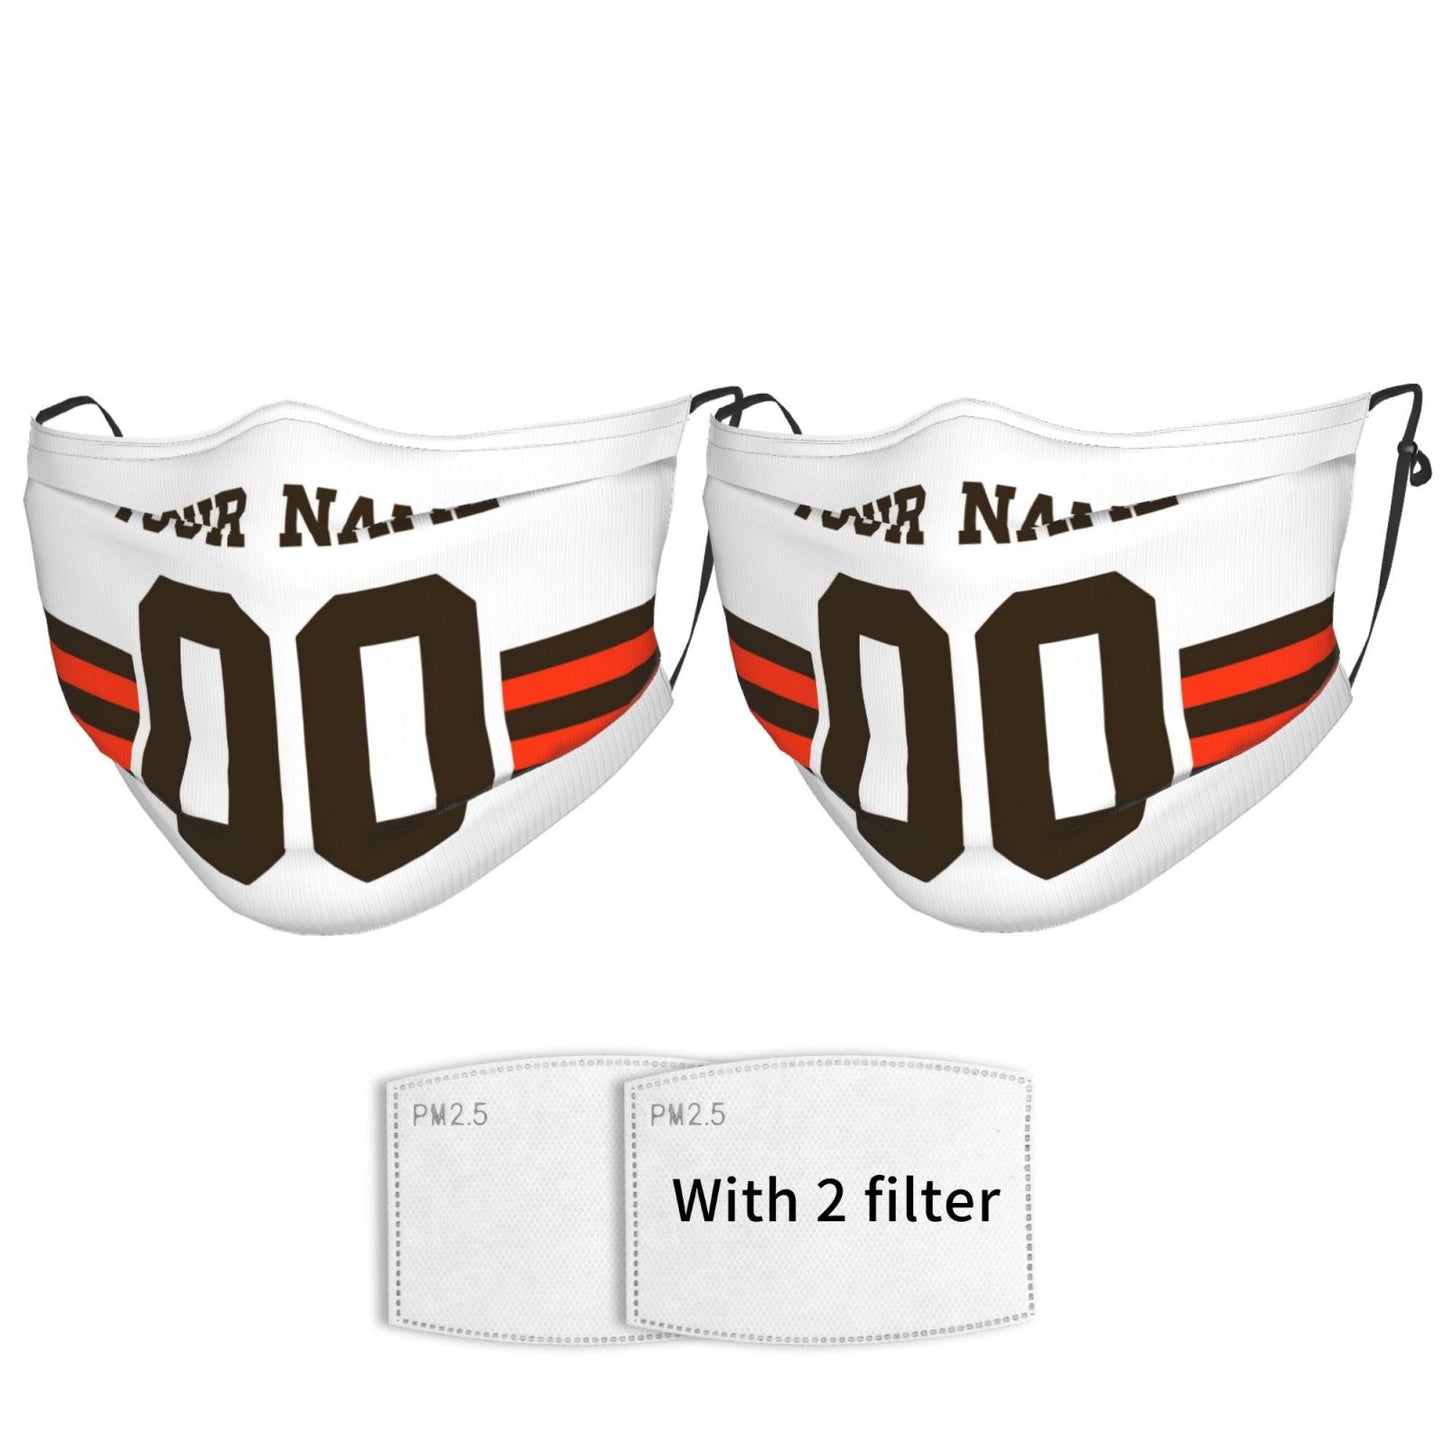 2-Pack Cleveland Browns Face Covering Football Team Decorative Adult Face Mask With Filters PM 2.5 White